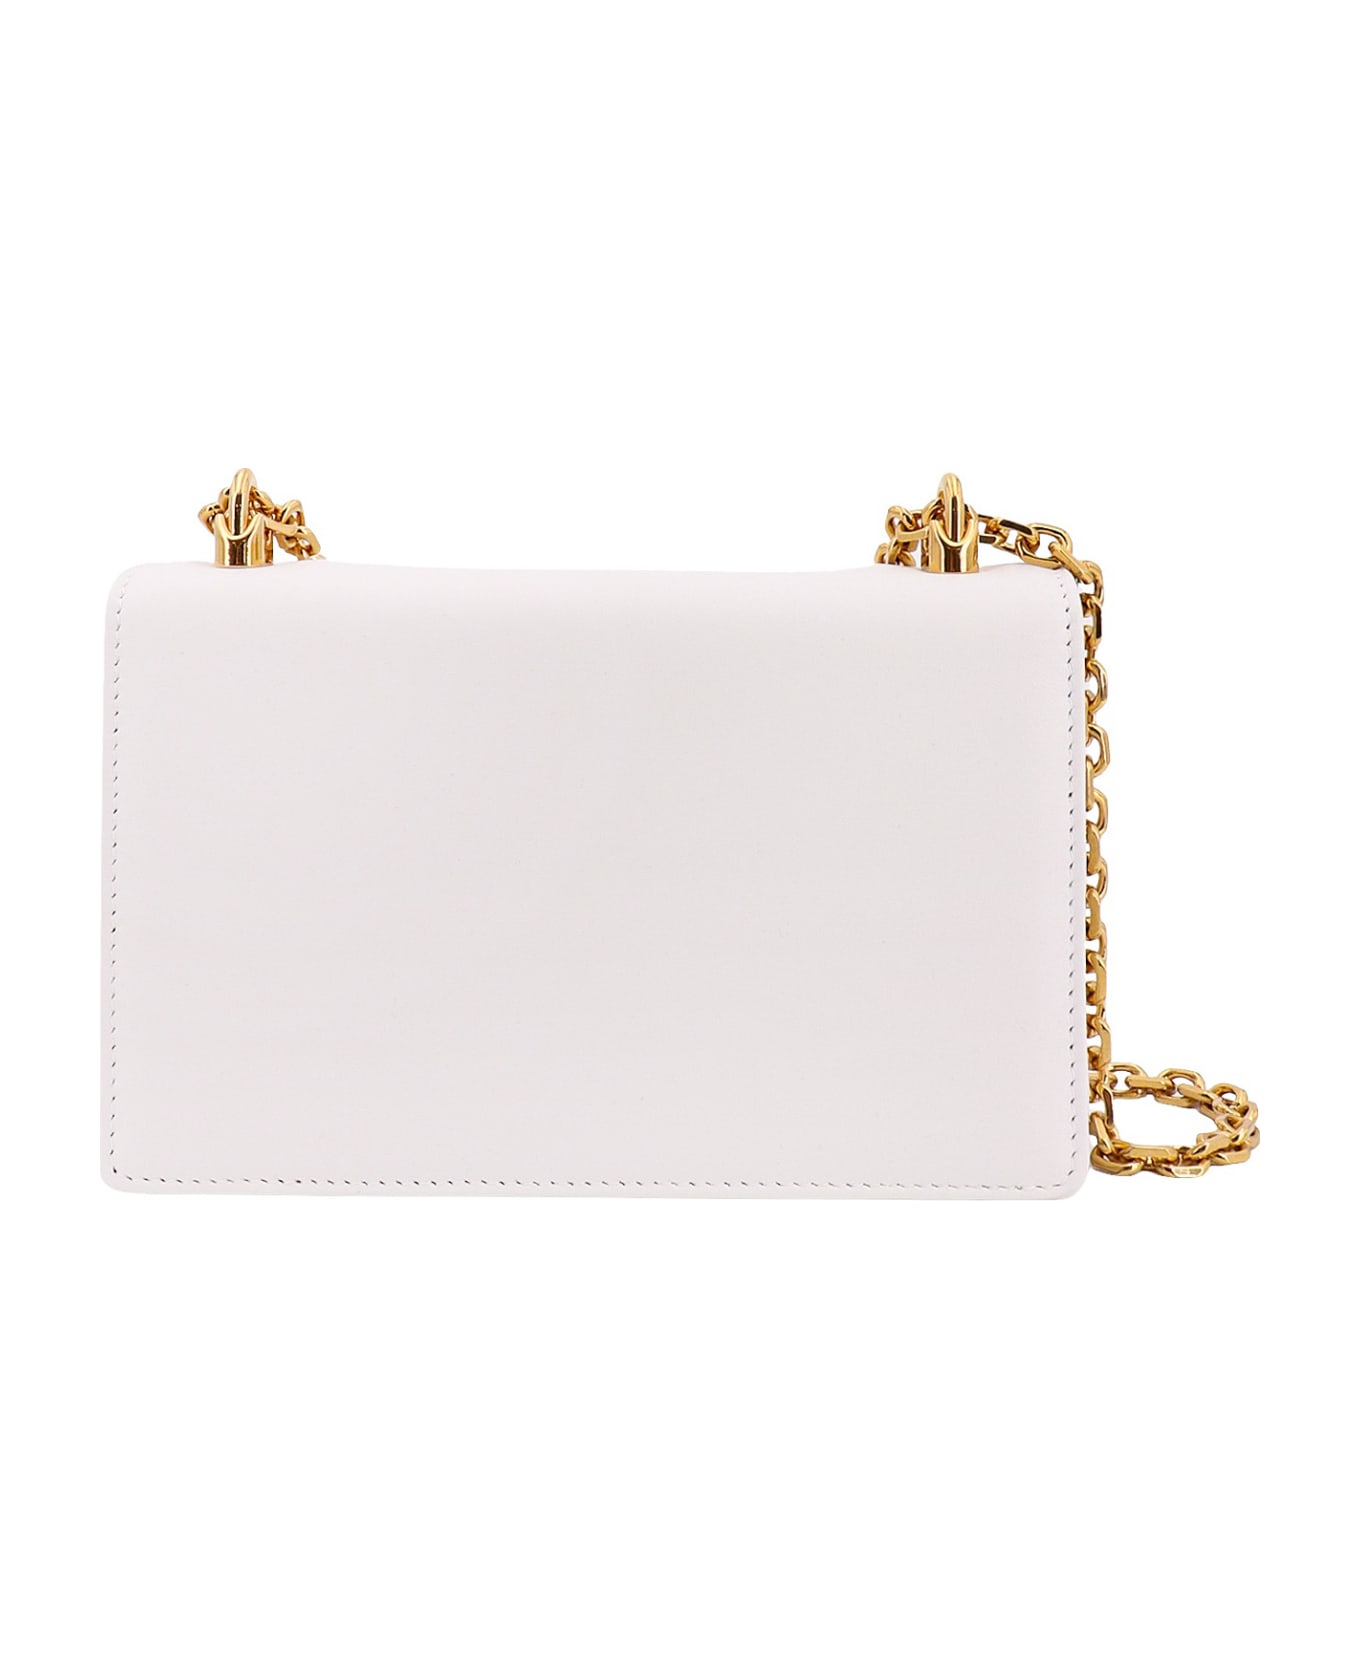 Dolce & Gabbana Shoulder Bag With Logo Plaque - White ショルダーバッグ